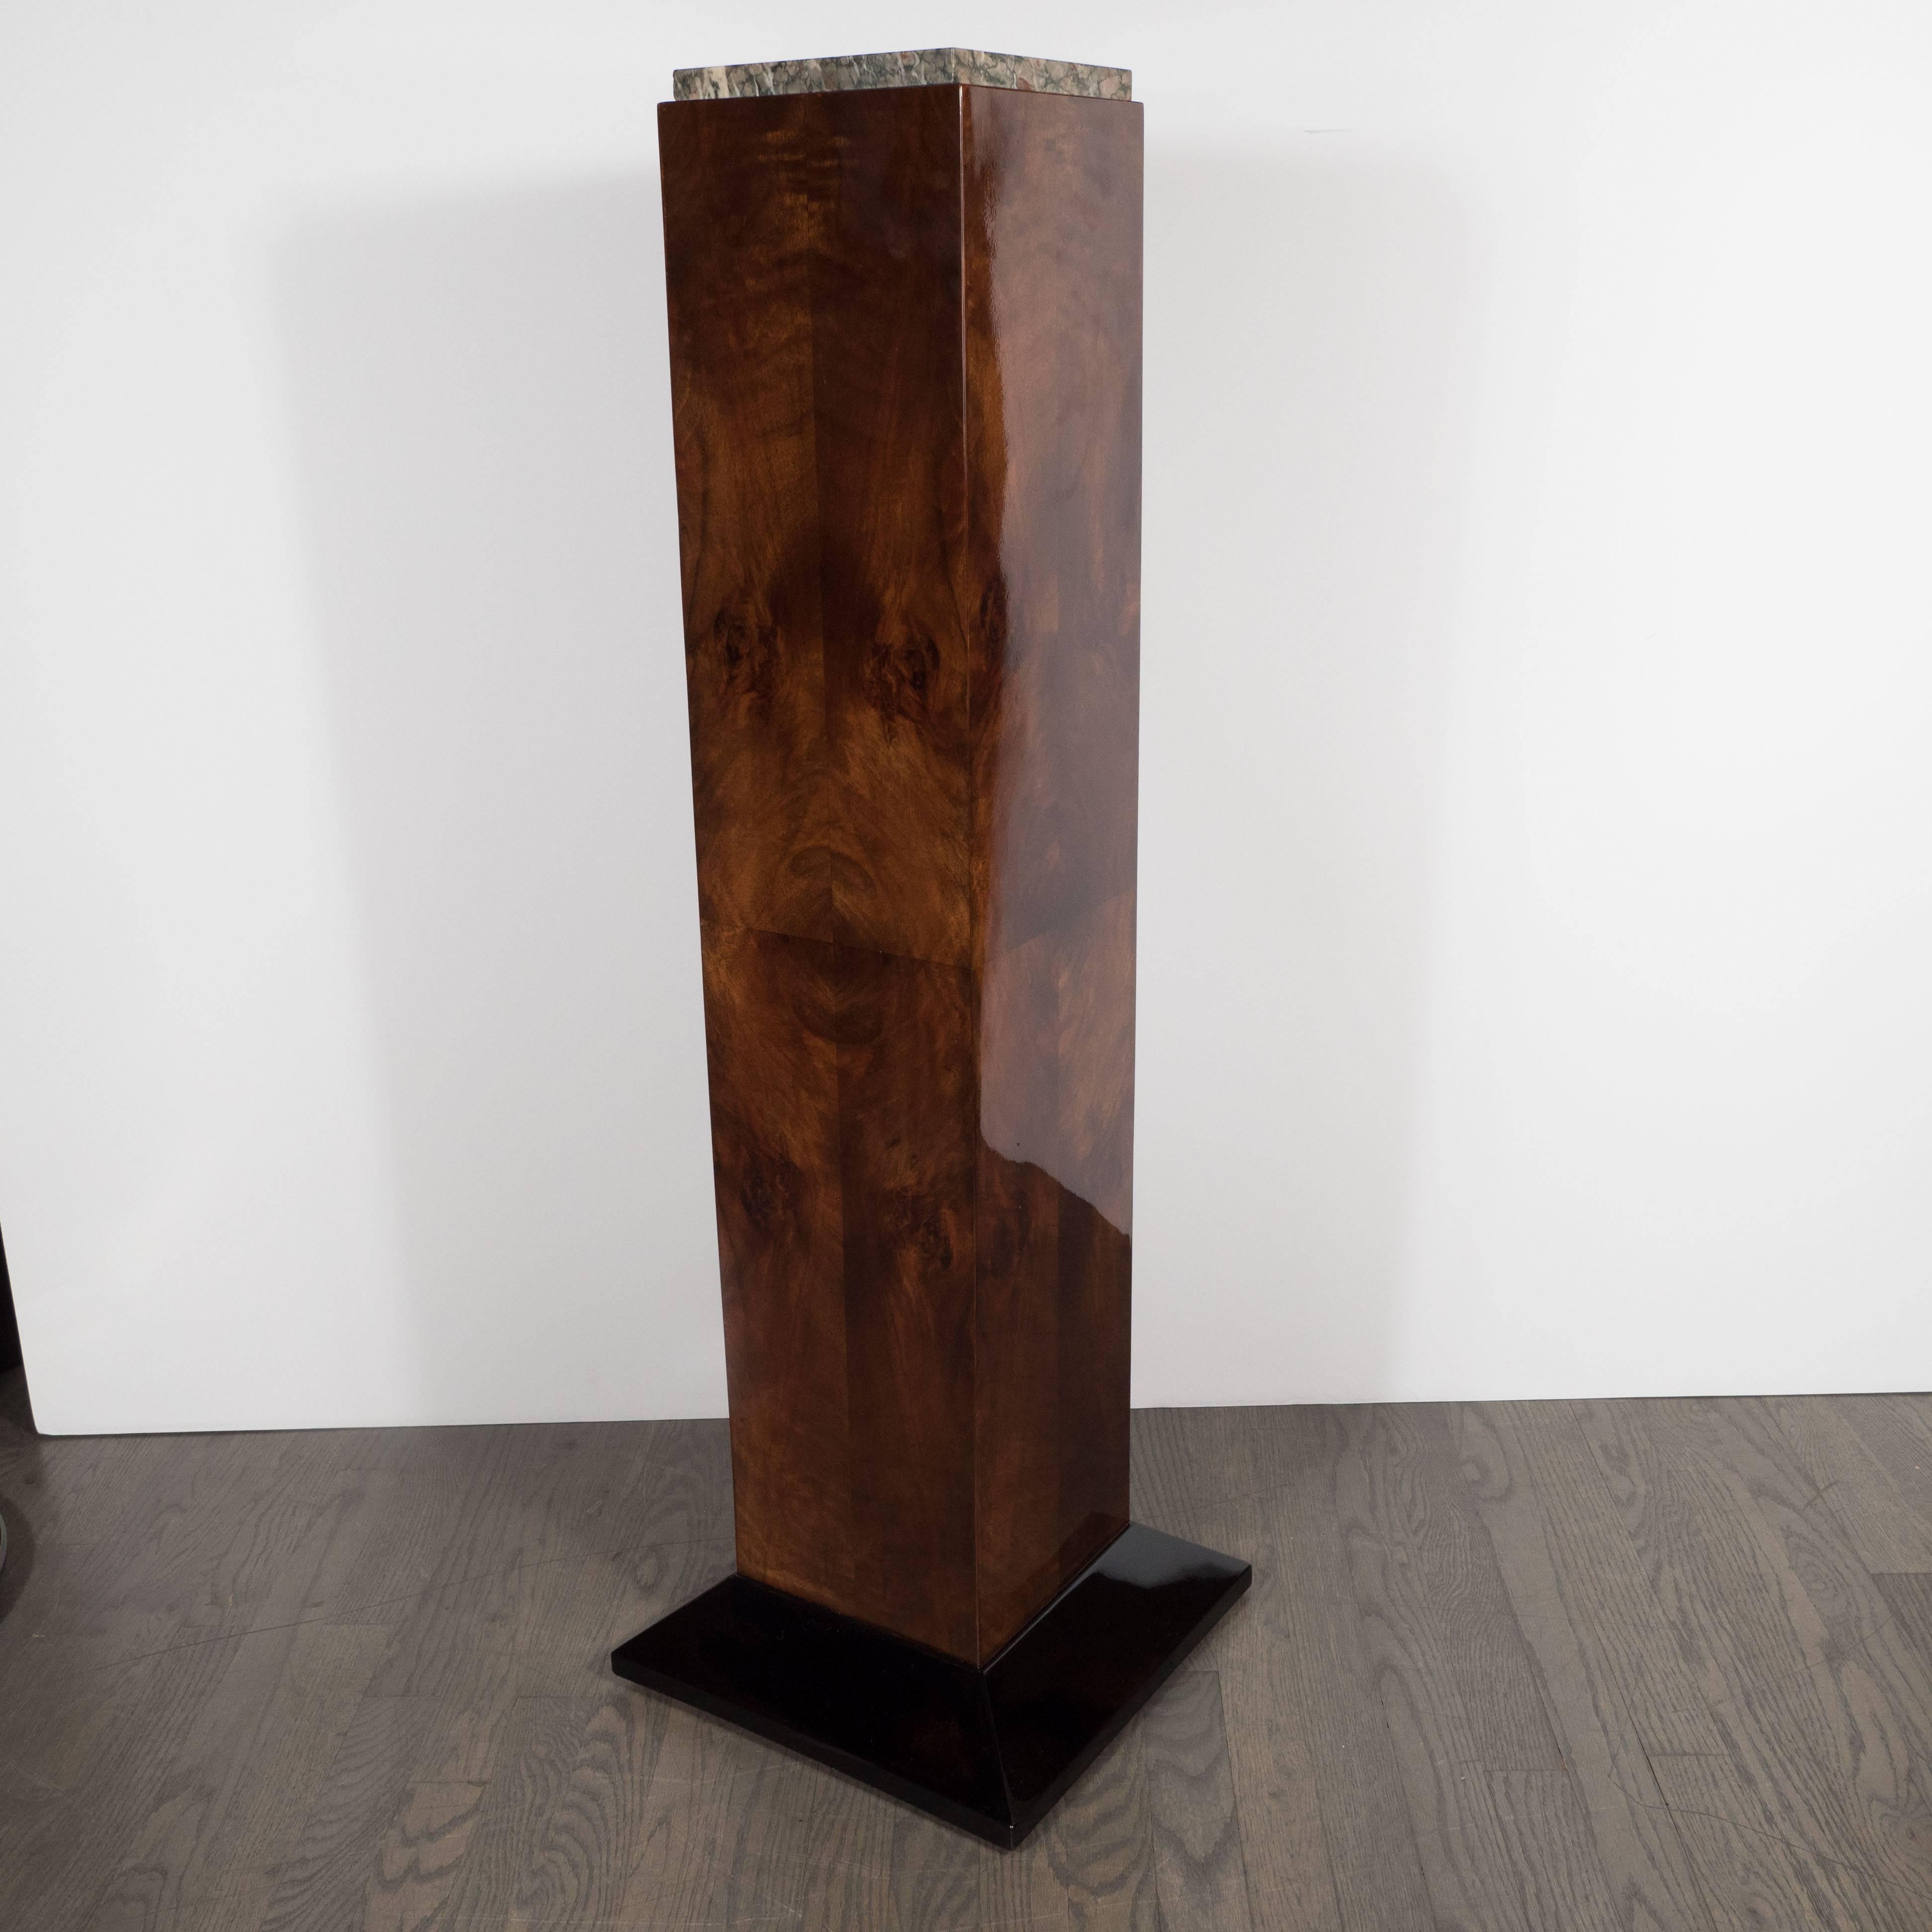 This refined pedestal- with its stunning contrast of book matched and burled walnut, exotic marble and black lacquer- was realized in France, circa 1930, at the height of Art Deco. It represents an exceptionally fine example of the time and place.